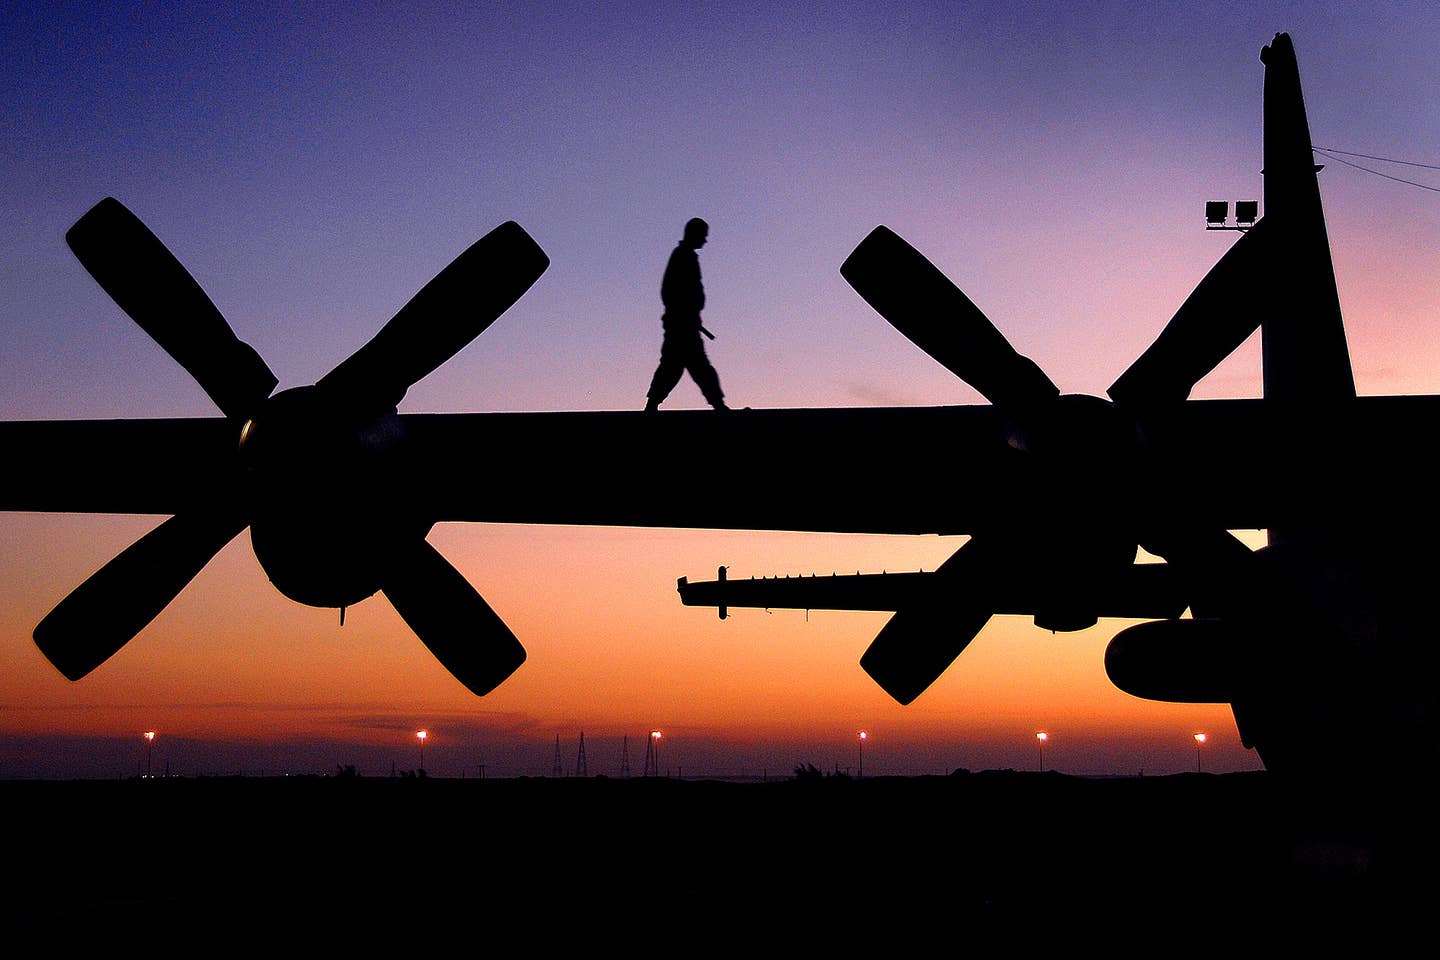 Tech. Sgt. Shane Kerns, 386th Expeditionary Aircraft Maintenance Squadron expediter, walks the wing of an EC-130 Compass Call aircraft while conducting a pre-flight check at an air base in Southwest Asia.